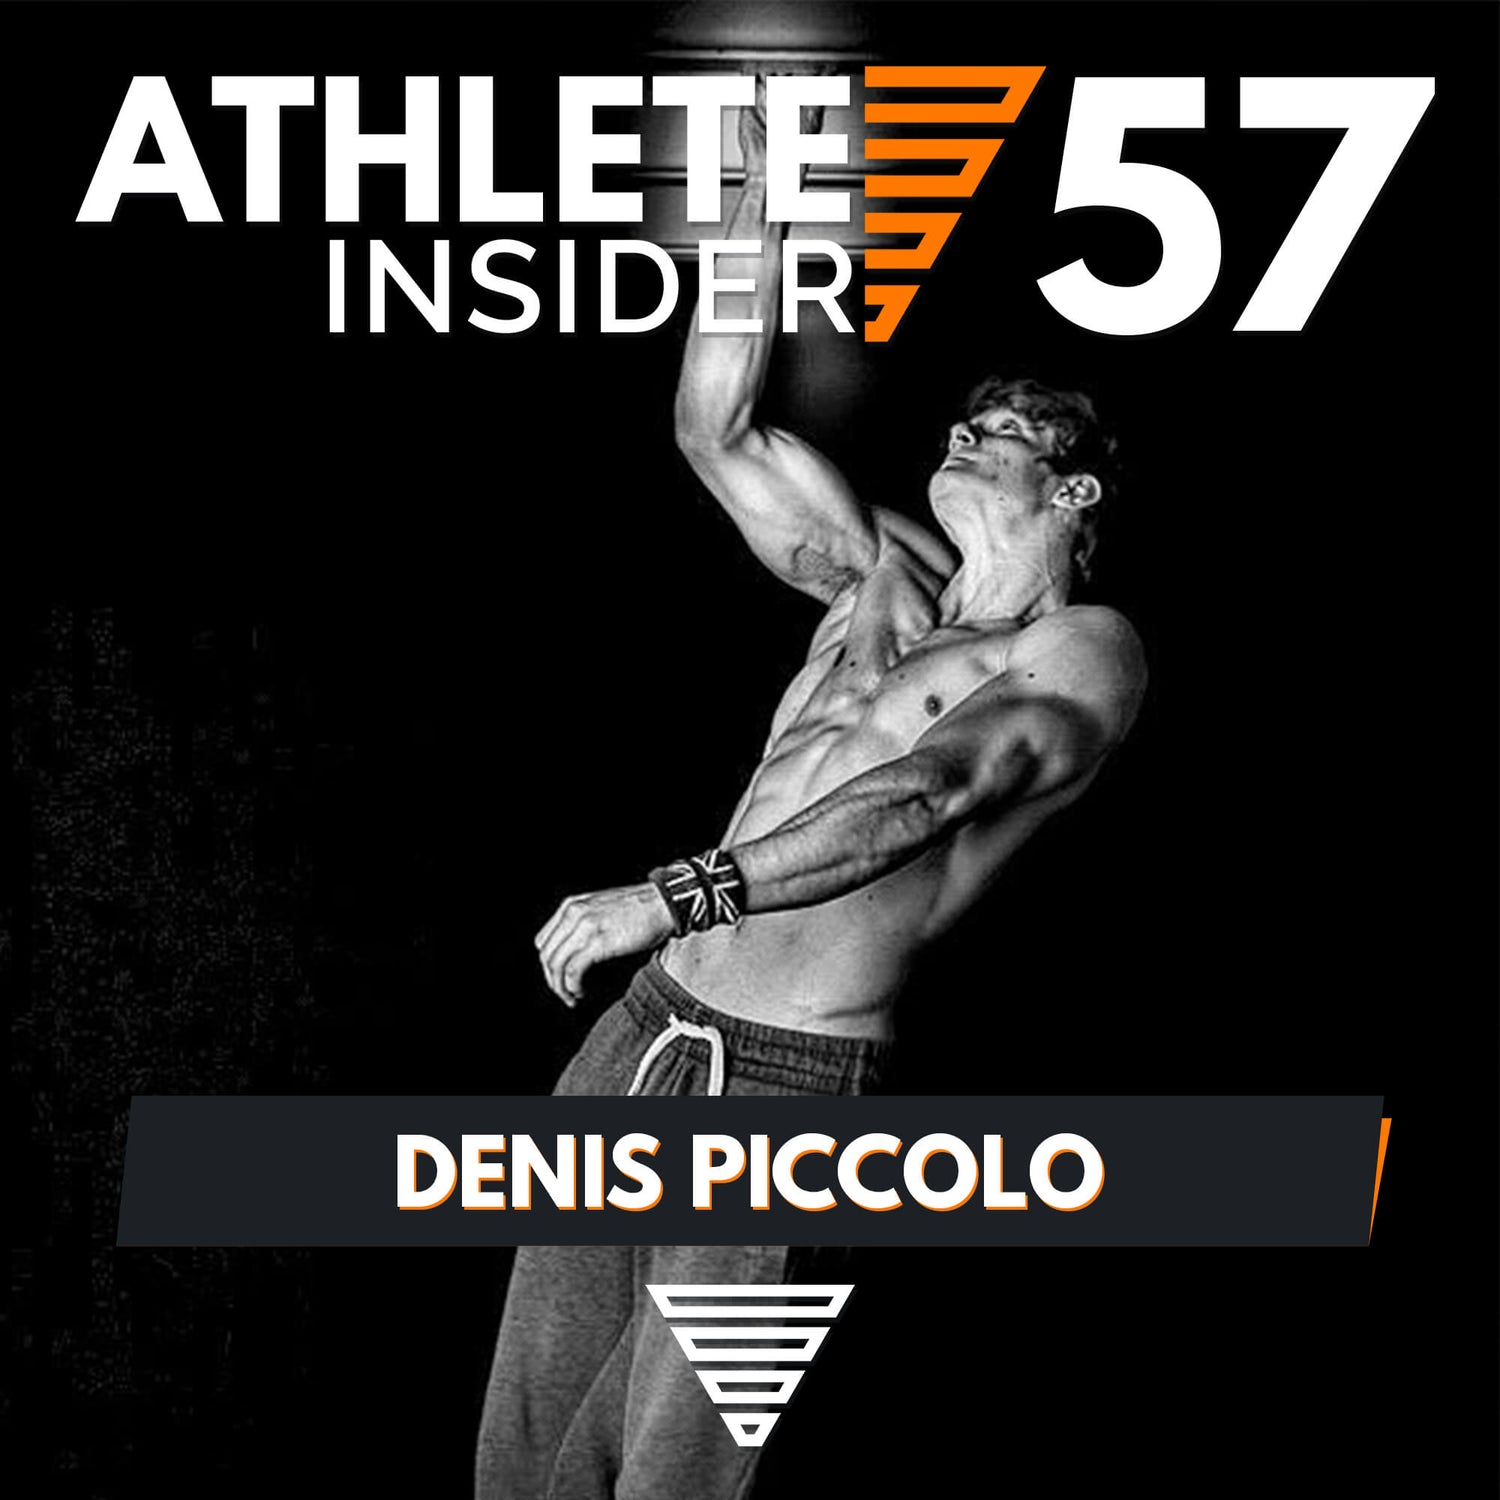 DENIS PICCOLO | Progress in Statics & Strength | Interview | The Athlete Insider Podcast #57